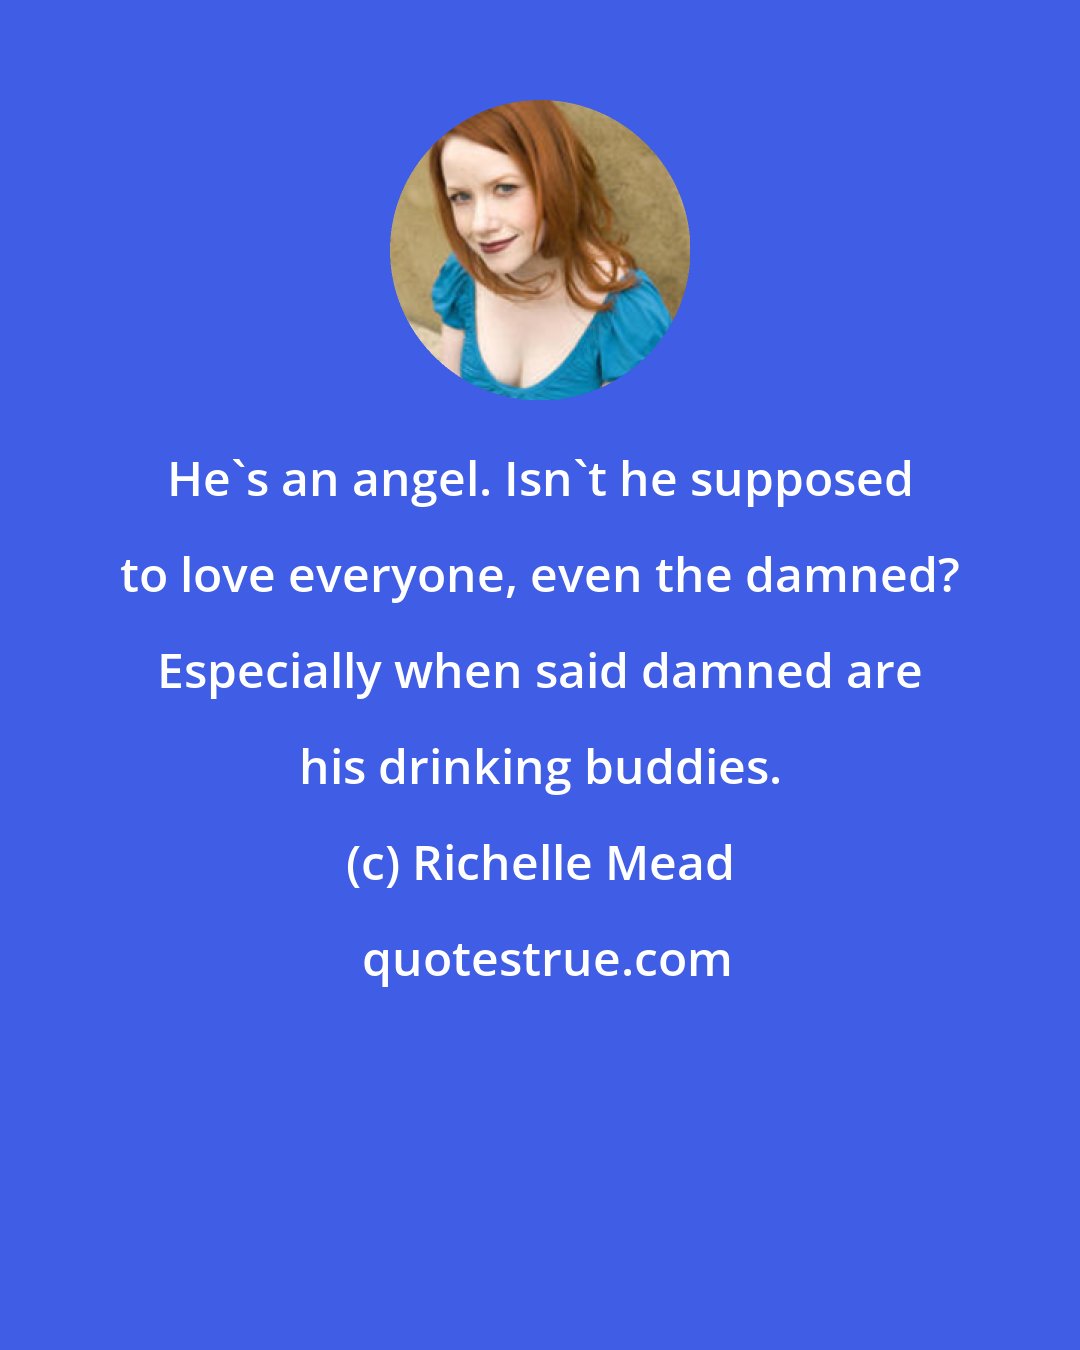 Richelle Mead: He's an angel. Isn't he supposed to love everyone, even the damned? Especially when said damned are his drinking buddies.